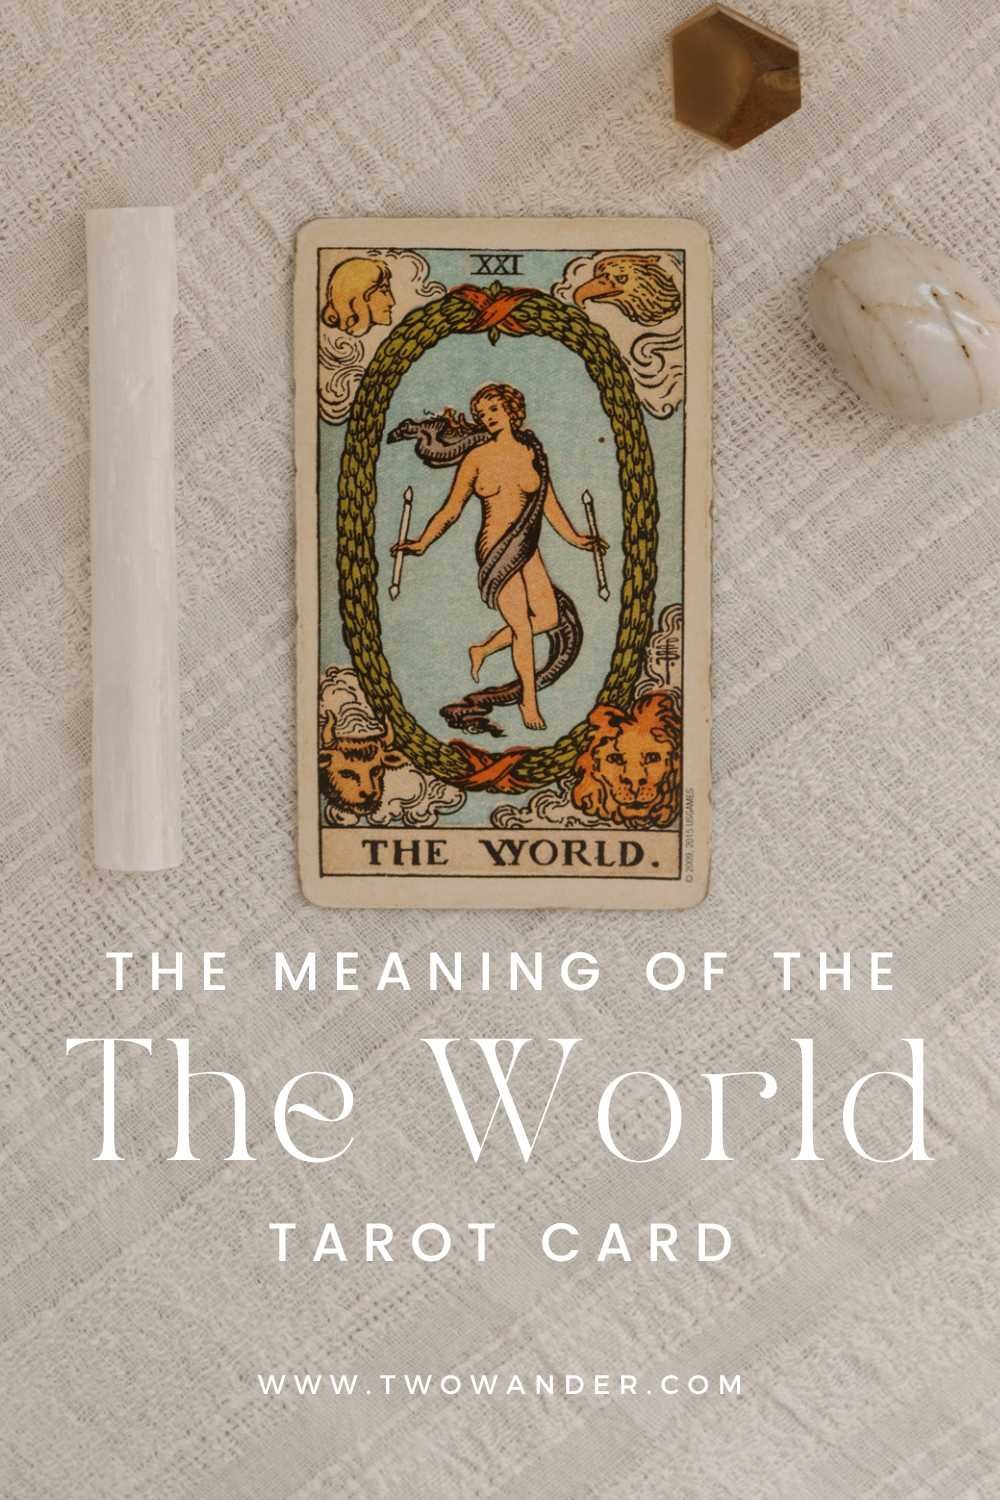 two-wander-the-world-tarot-card-meaning